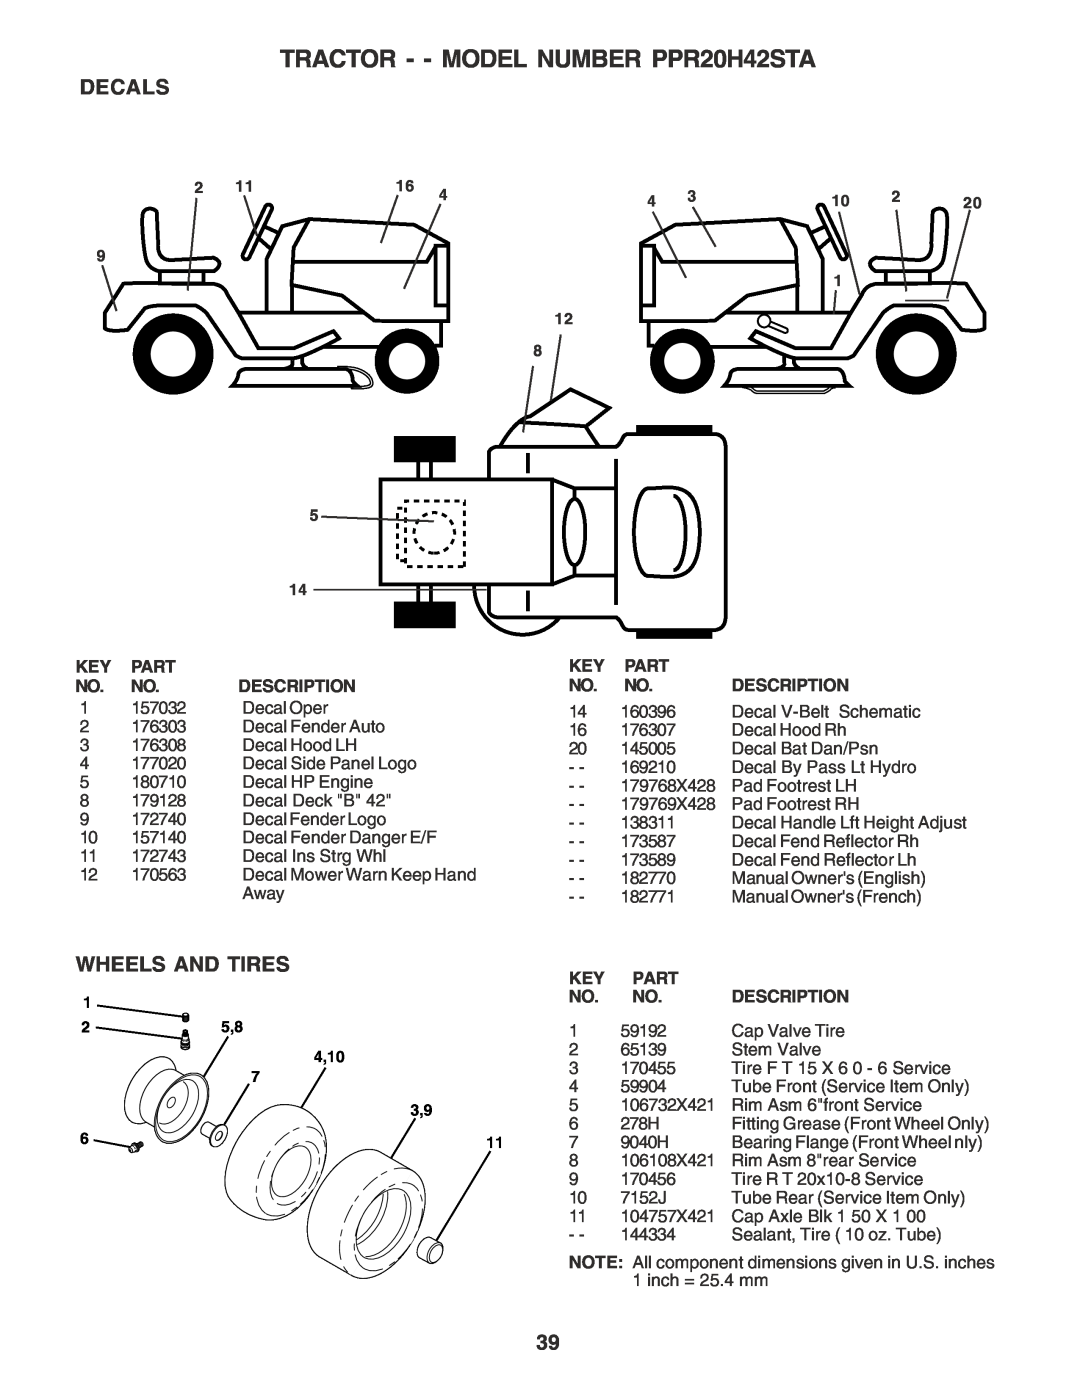 Poulan 182770 owner manual Decals, Wheels And Tires, TRACTOR - - MODEL NUMBER PPR20H42STA 